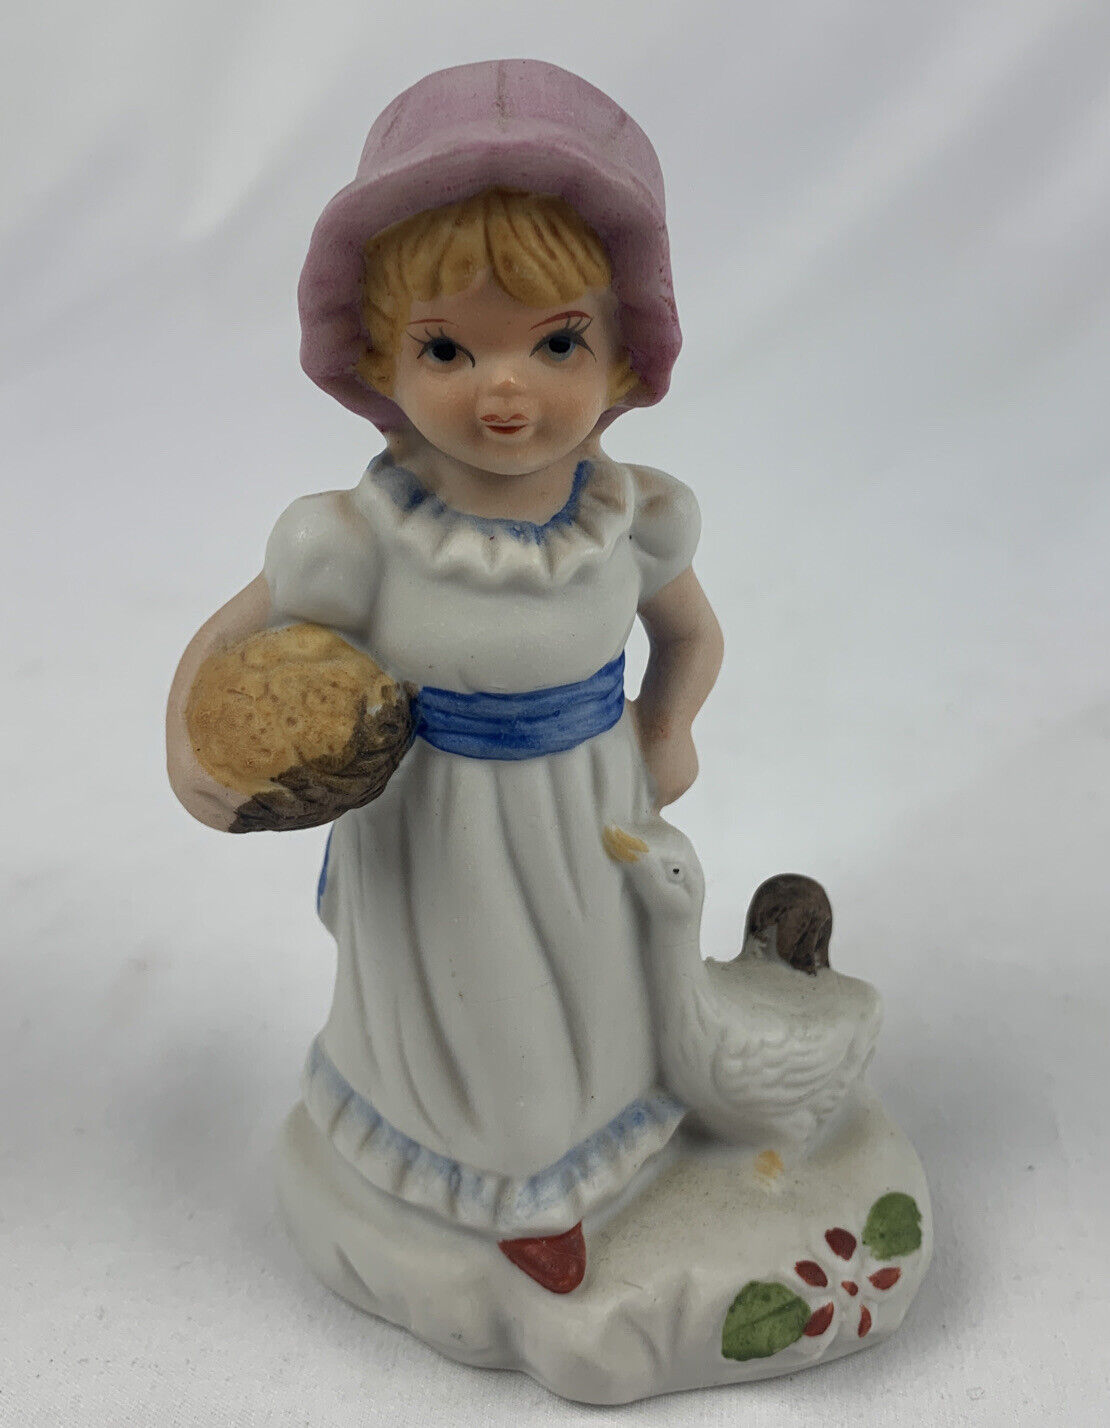 Vintage Figurine Girl Holding Basket with Duck Deville Ceramic Taiwan 5” tall